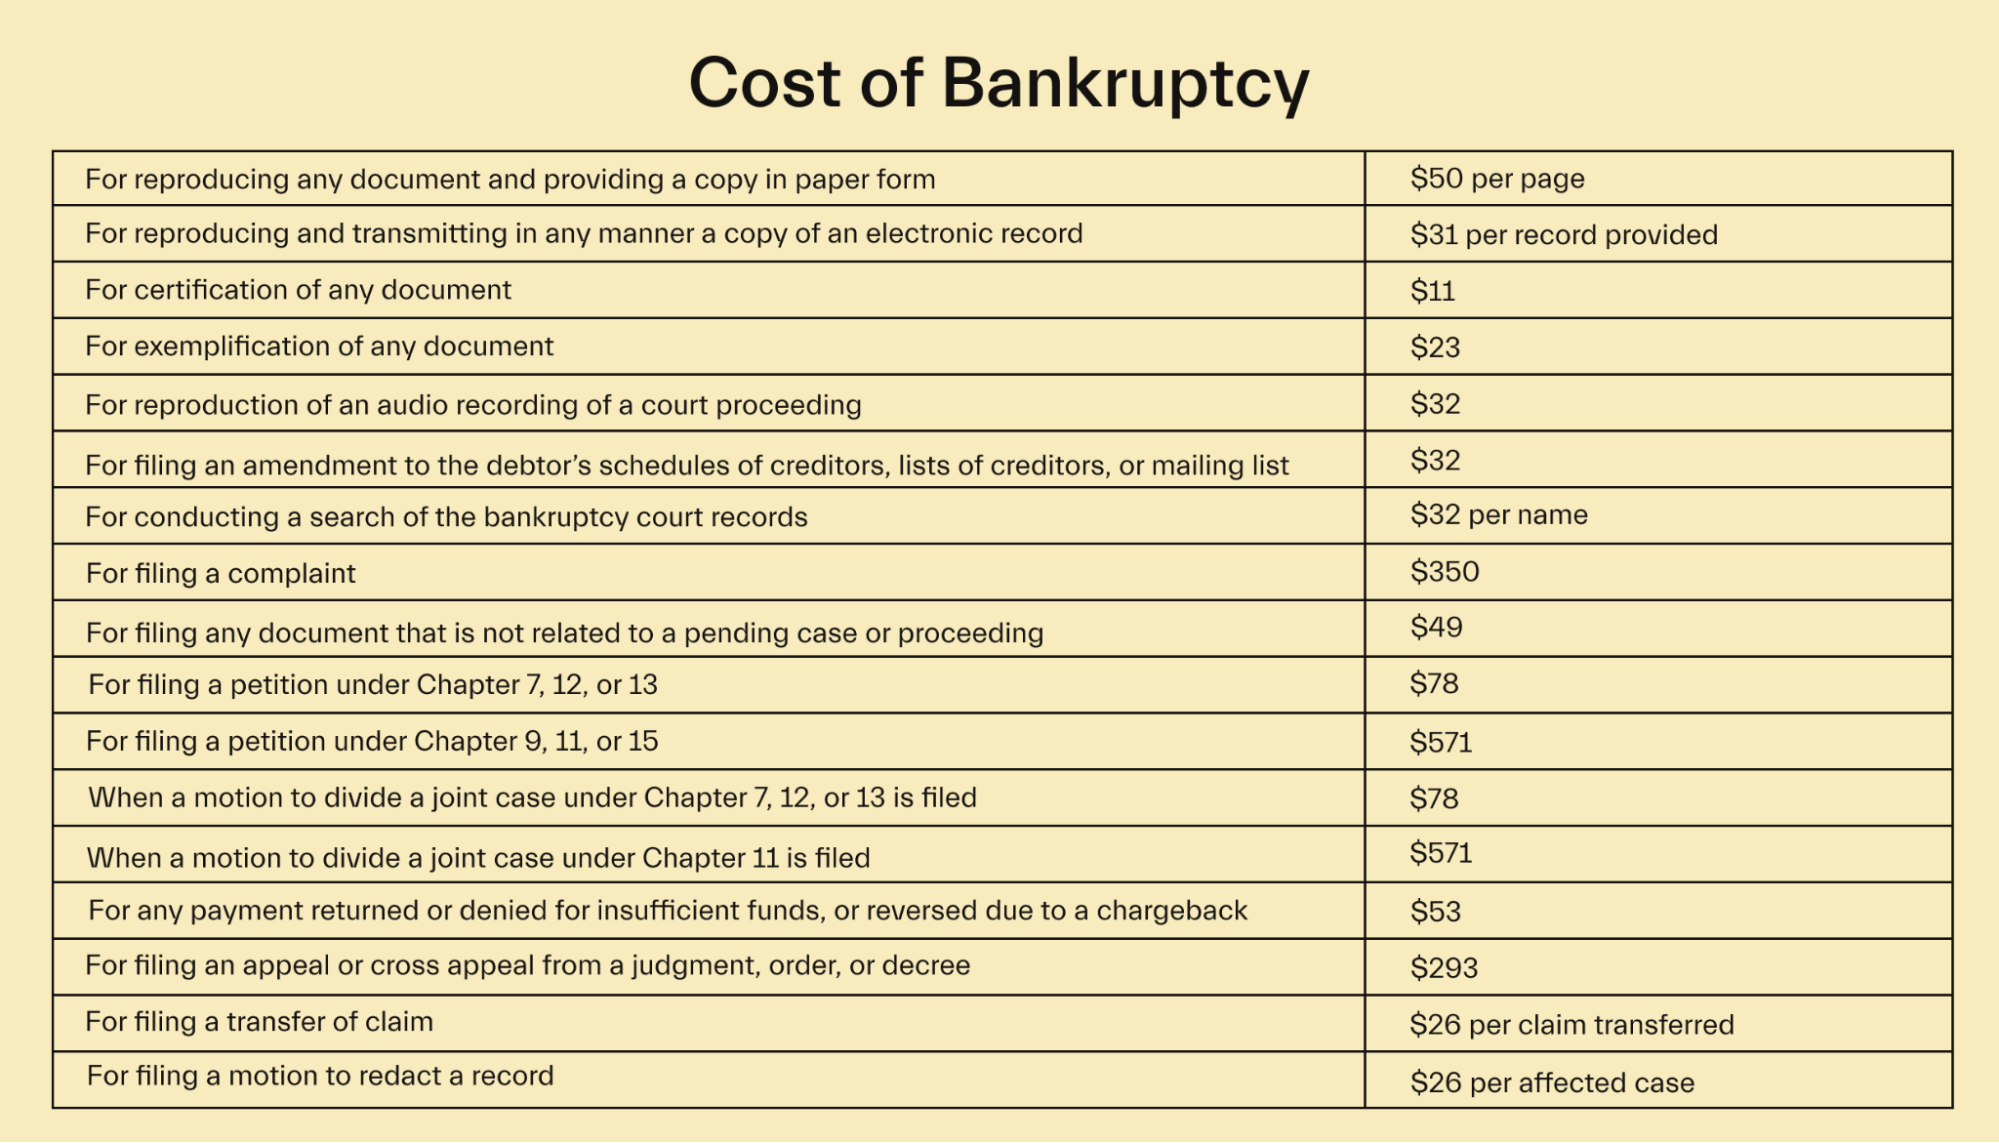 Cost of Bankruptcy